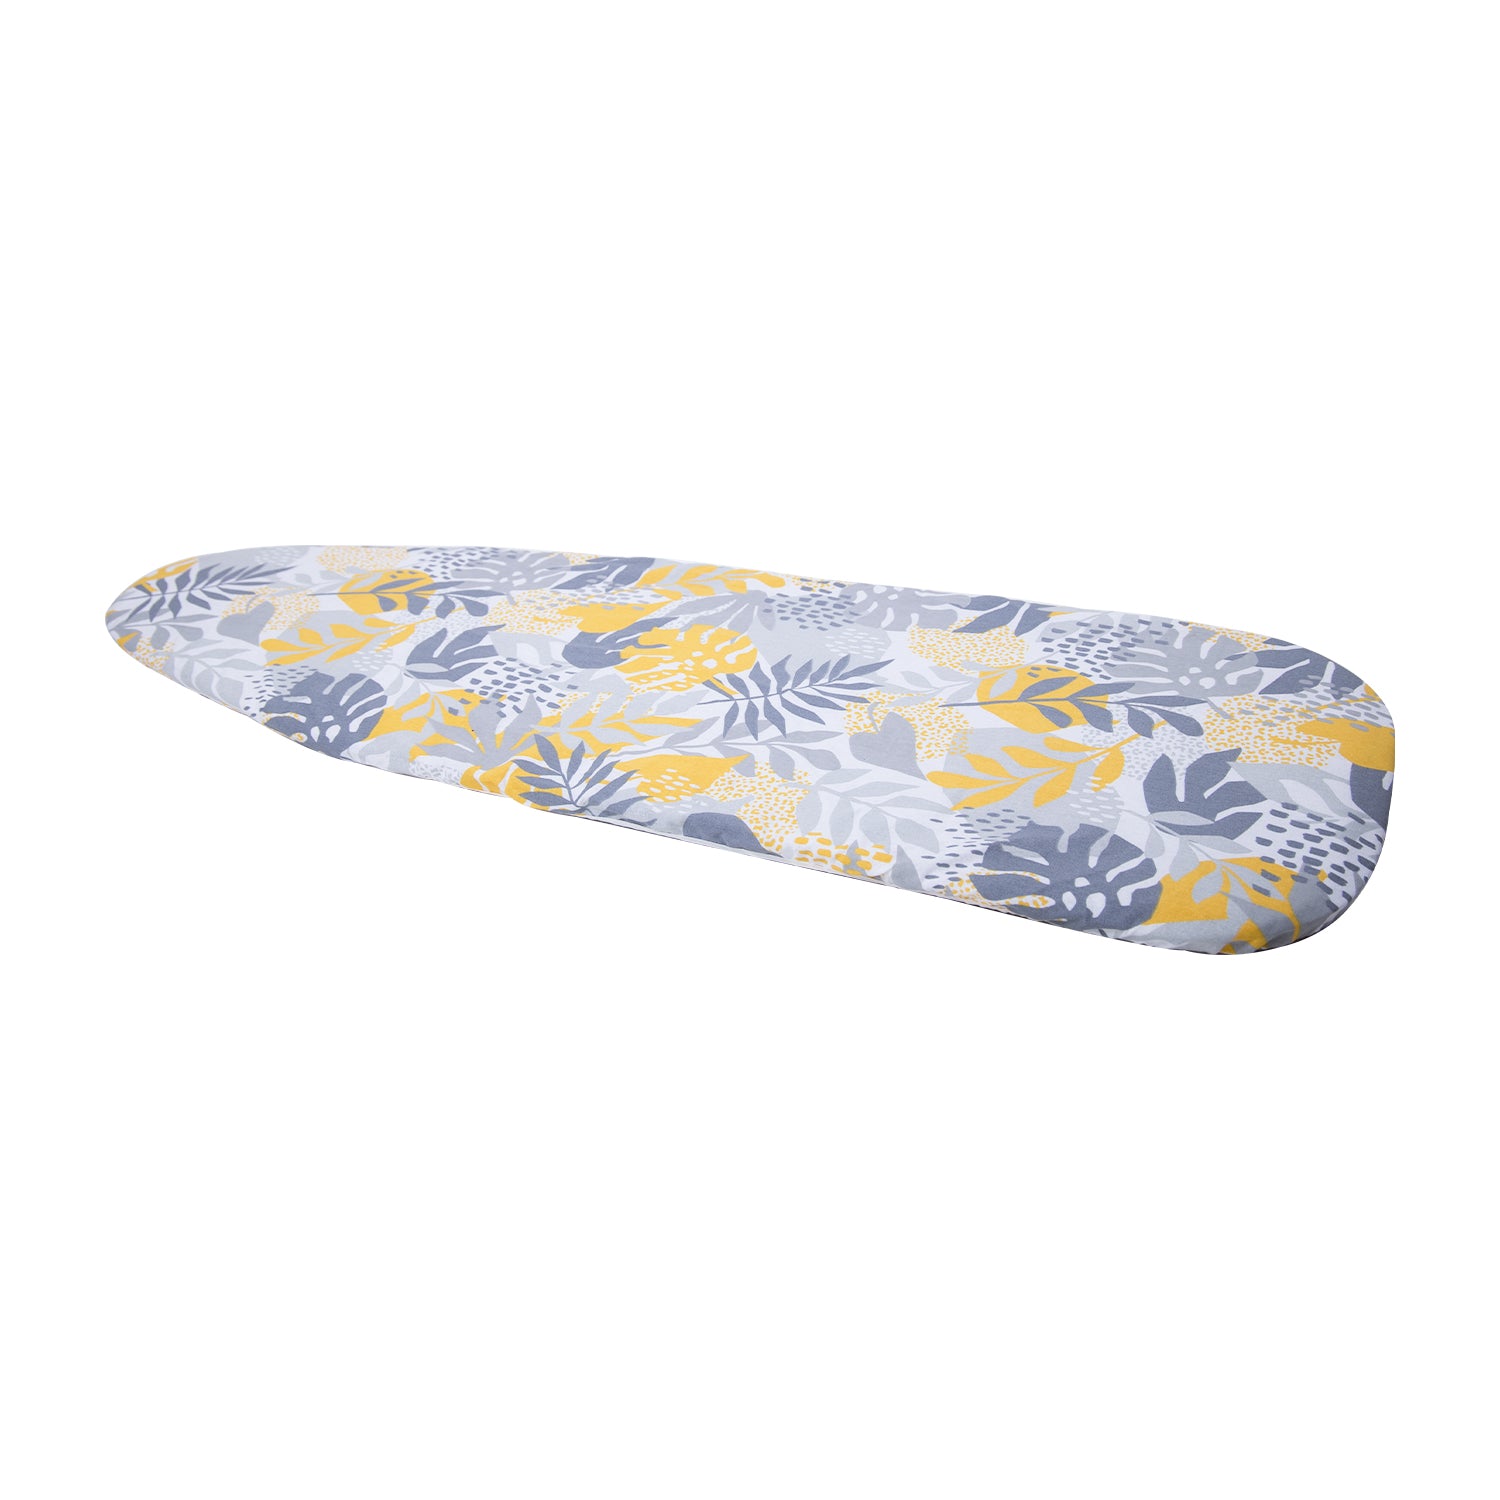 Floral Print 3-Leg Ironing Board Cover